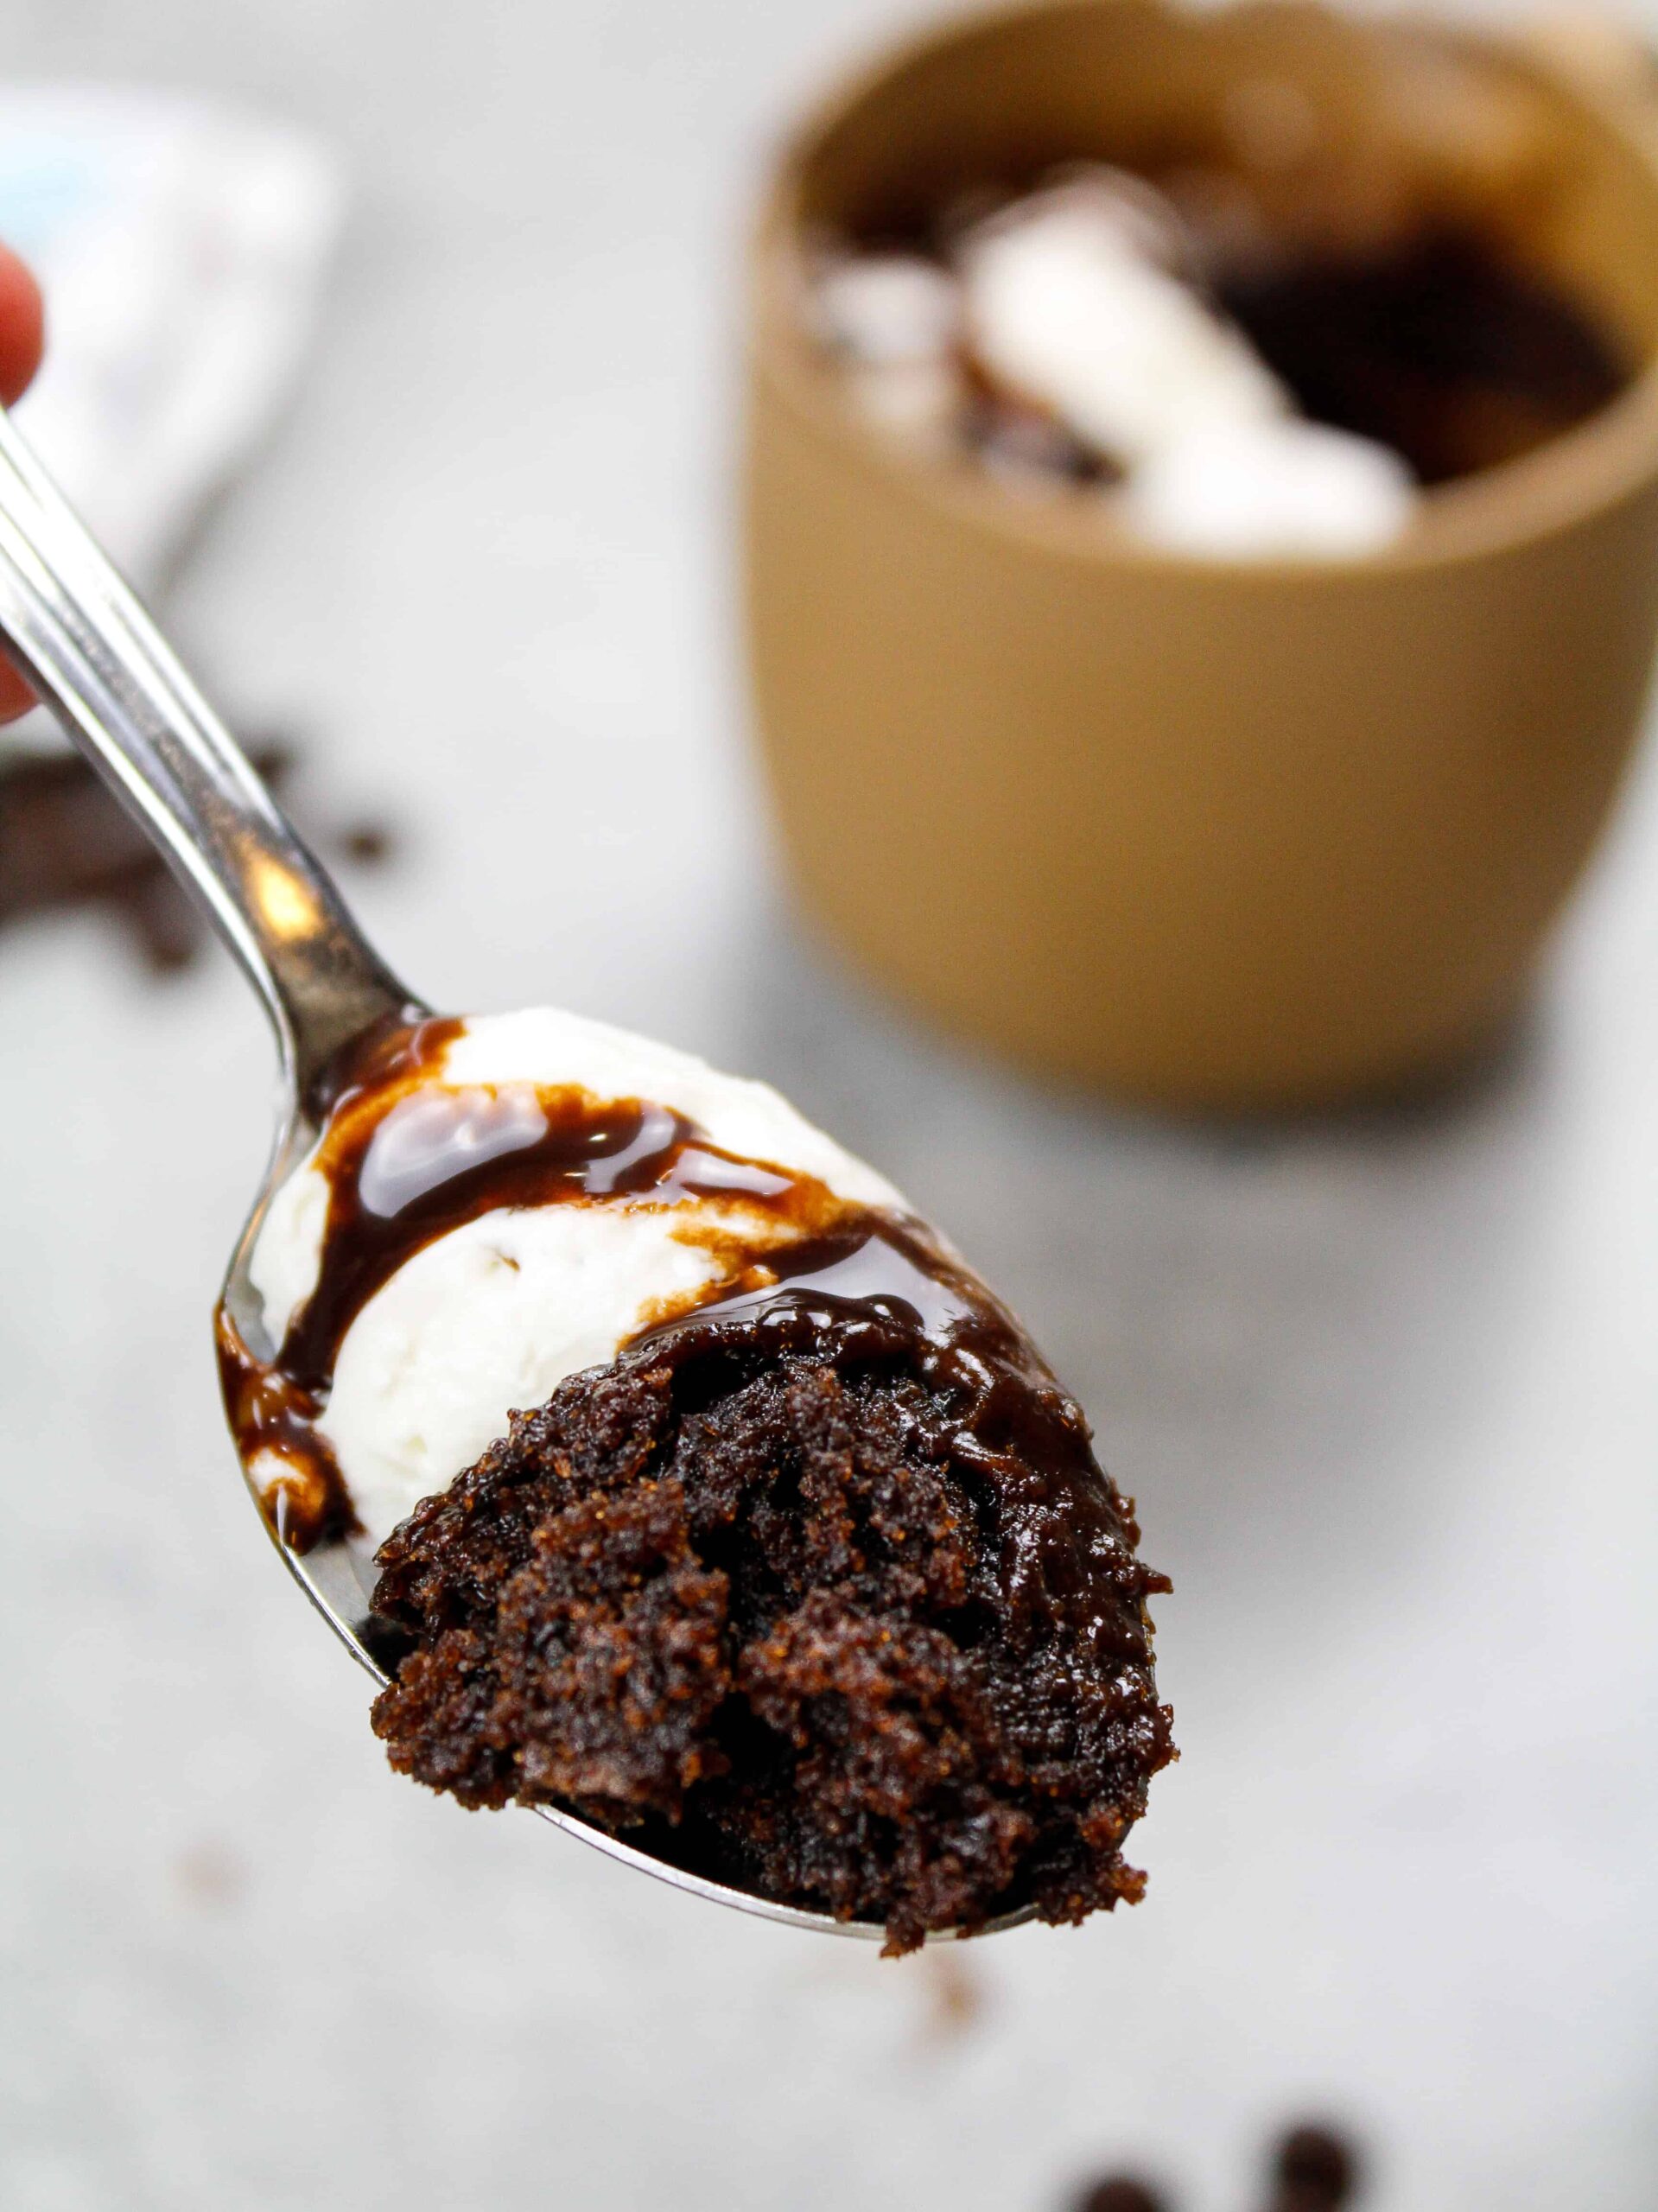 image of a spoonful of hot cocoa mug cake to show how delicious and chocolatey it is